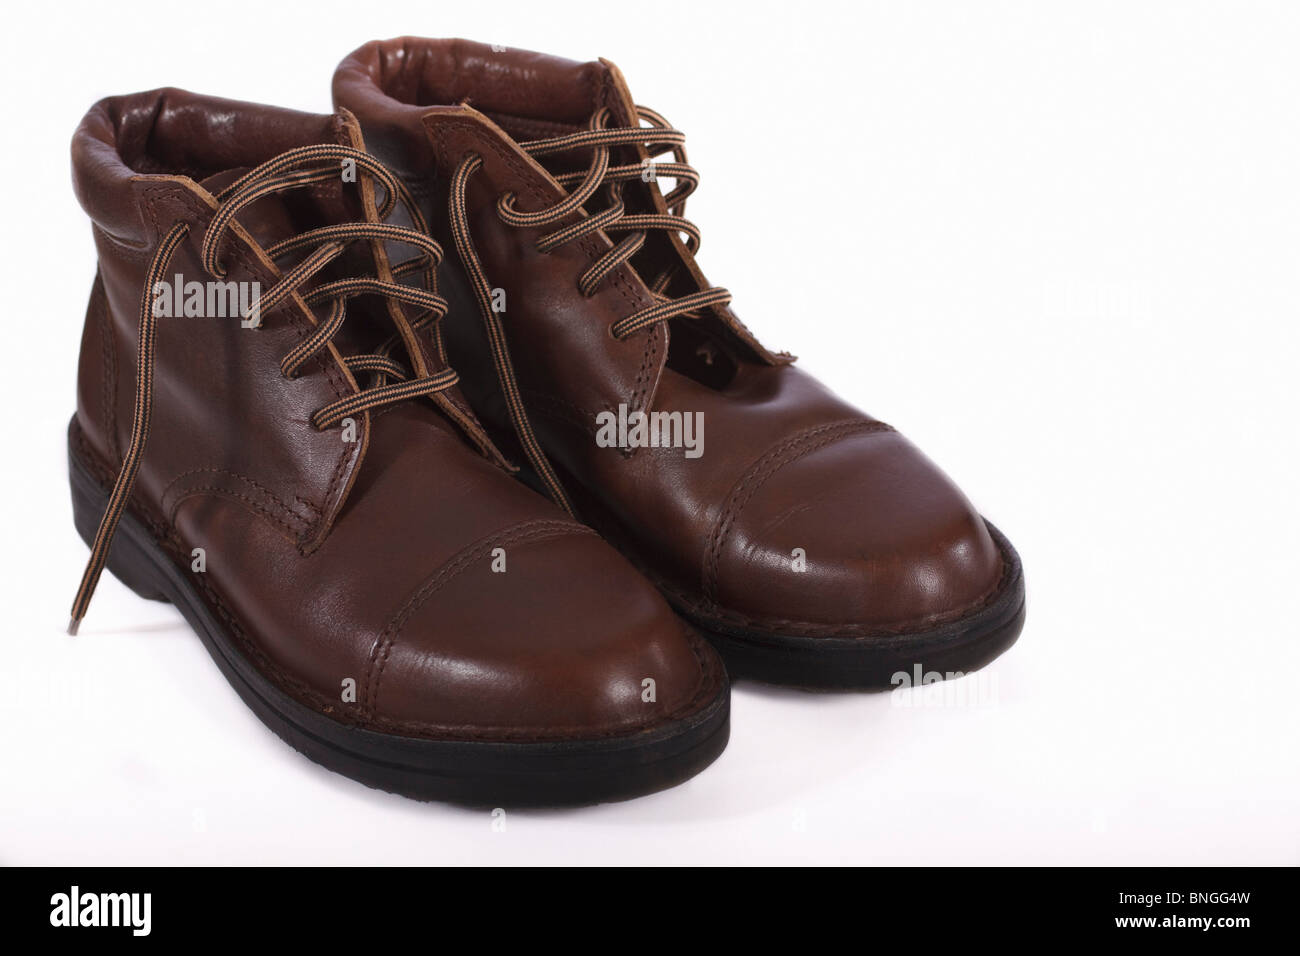 Pair of brown leather ladies low heel boots. Isolated. Stock Photo